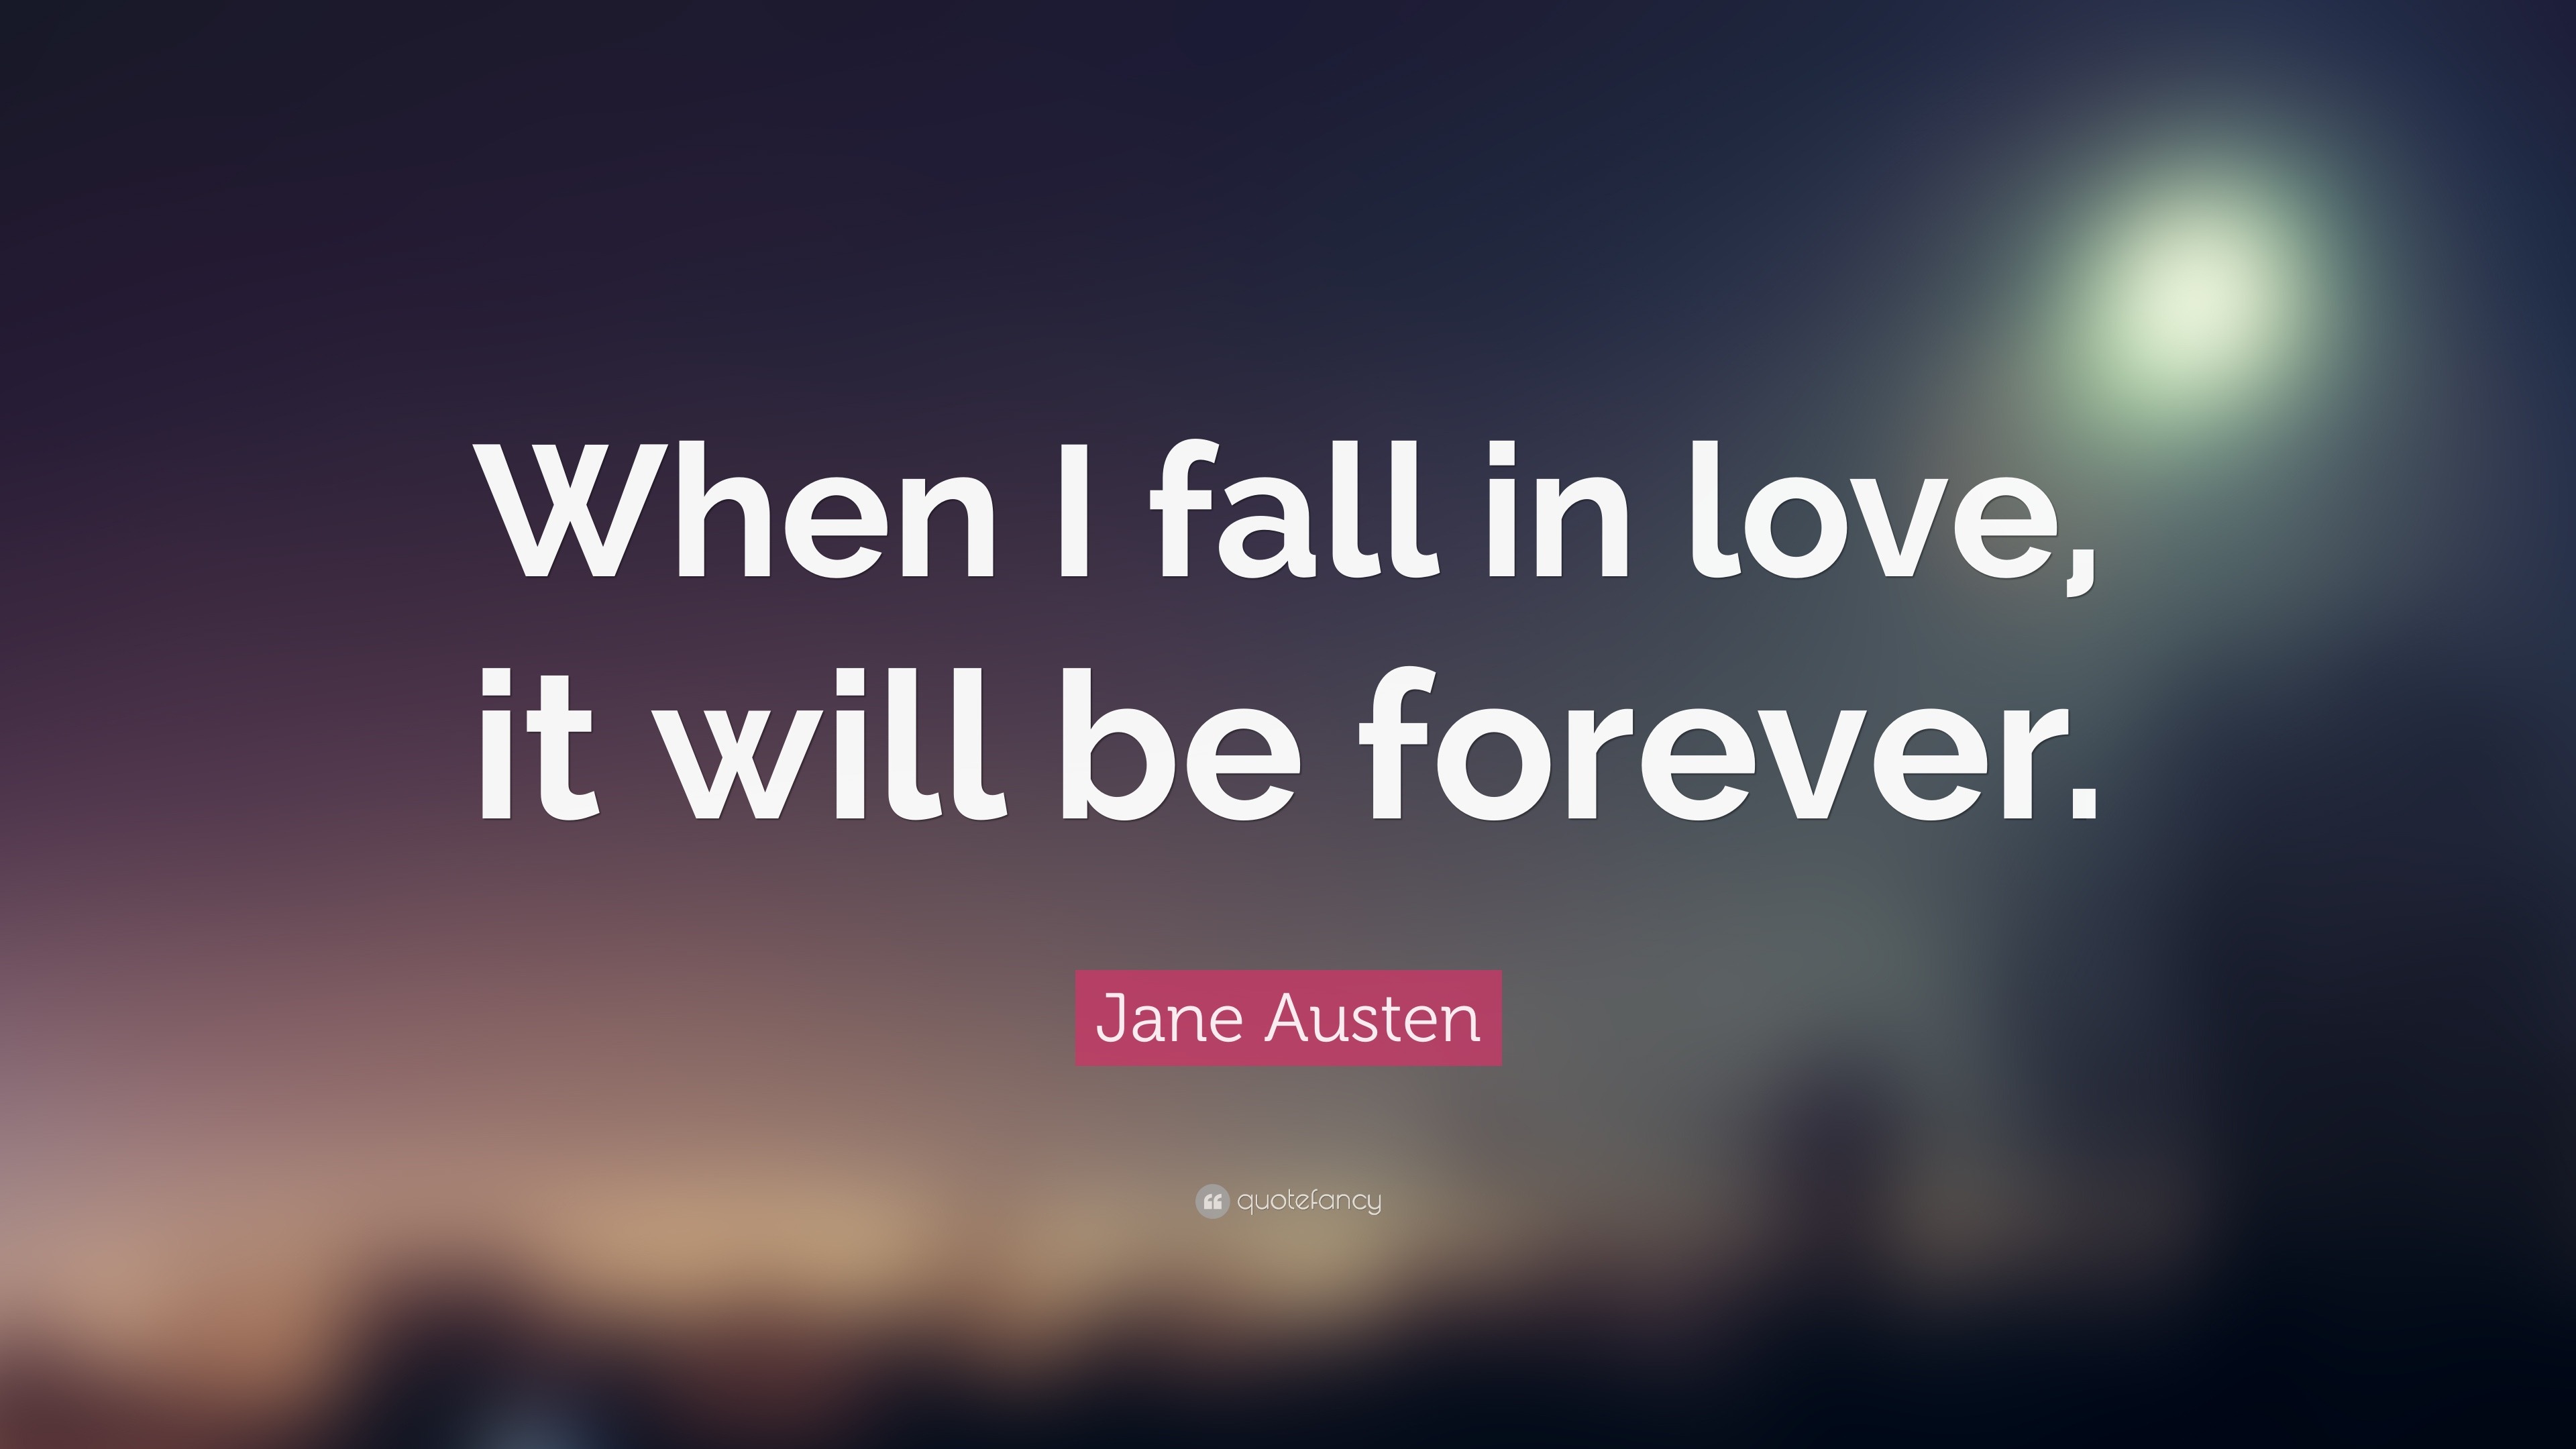 Jane Austen Quote “When I fall in love it will be forever